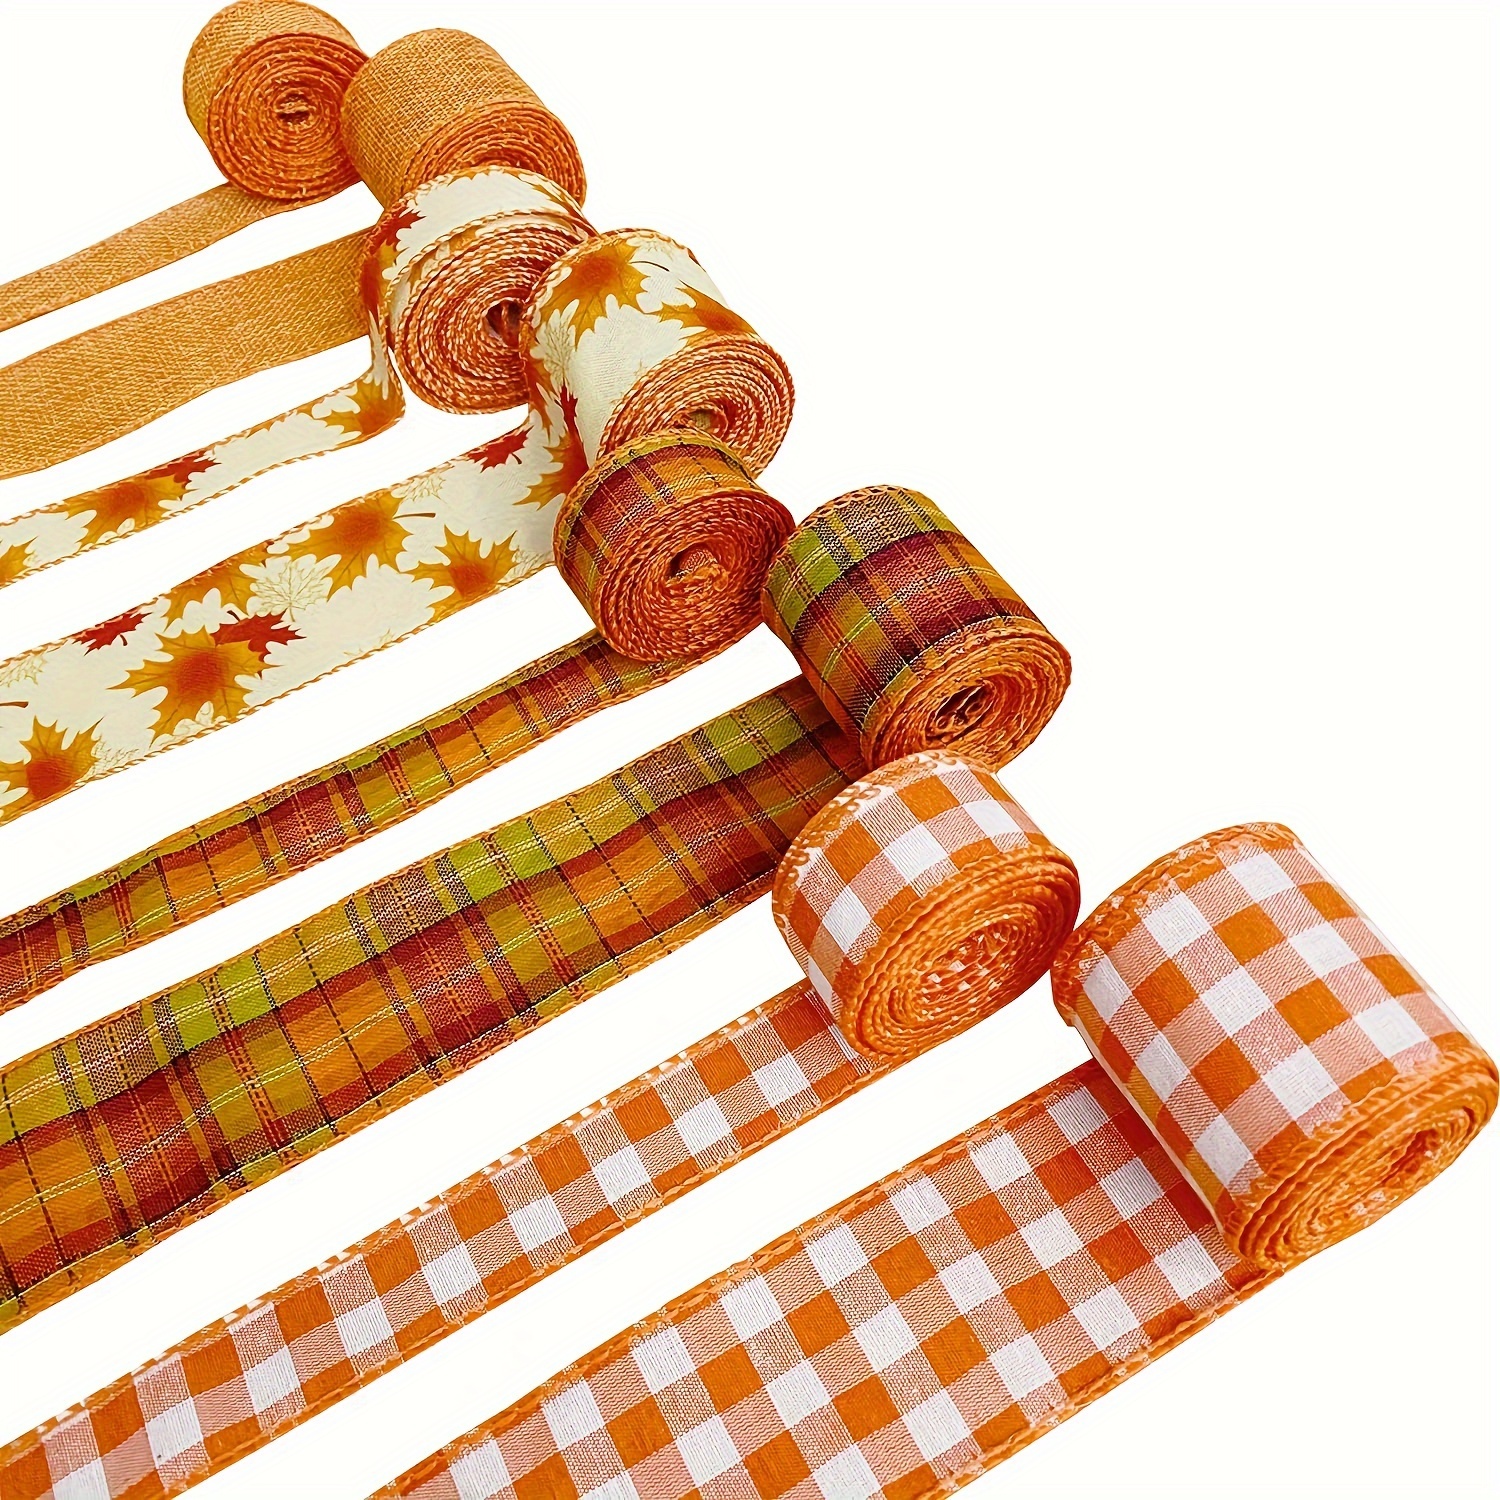 

Autumn-themed Wired Edge Ribbon Set – 40 Yards Total In 8 Rolls, Burlap Craft Ribbons For Thanksgiving, Farmhouse Wreaths & Bows, Check & Fall Leaves Design, Mixed Colors